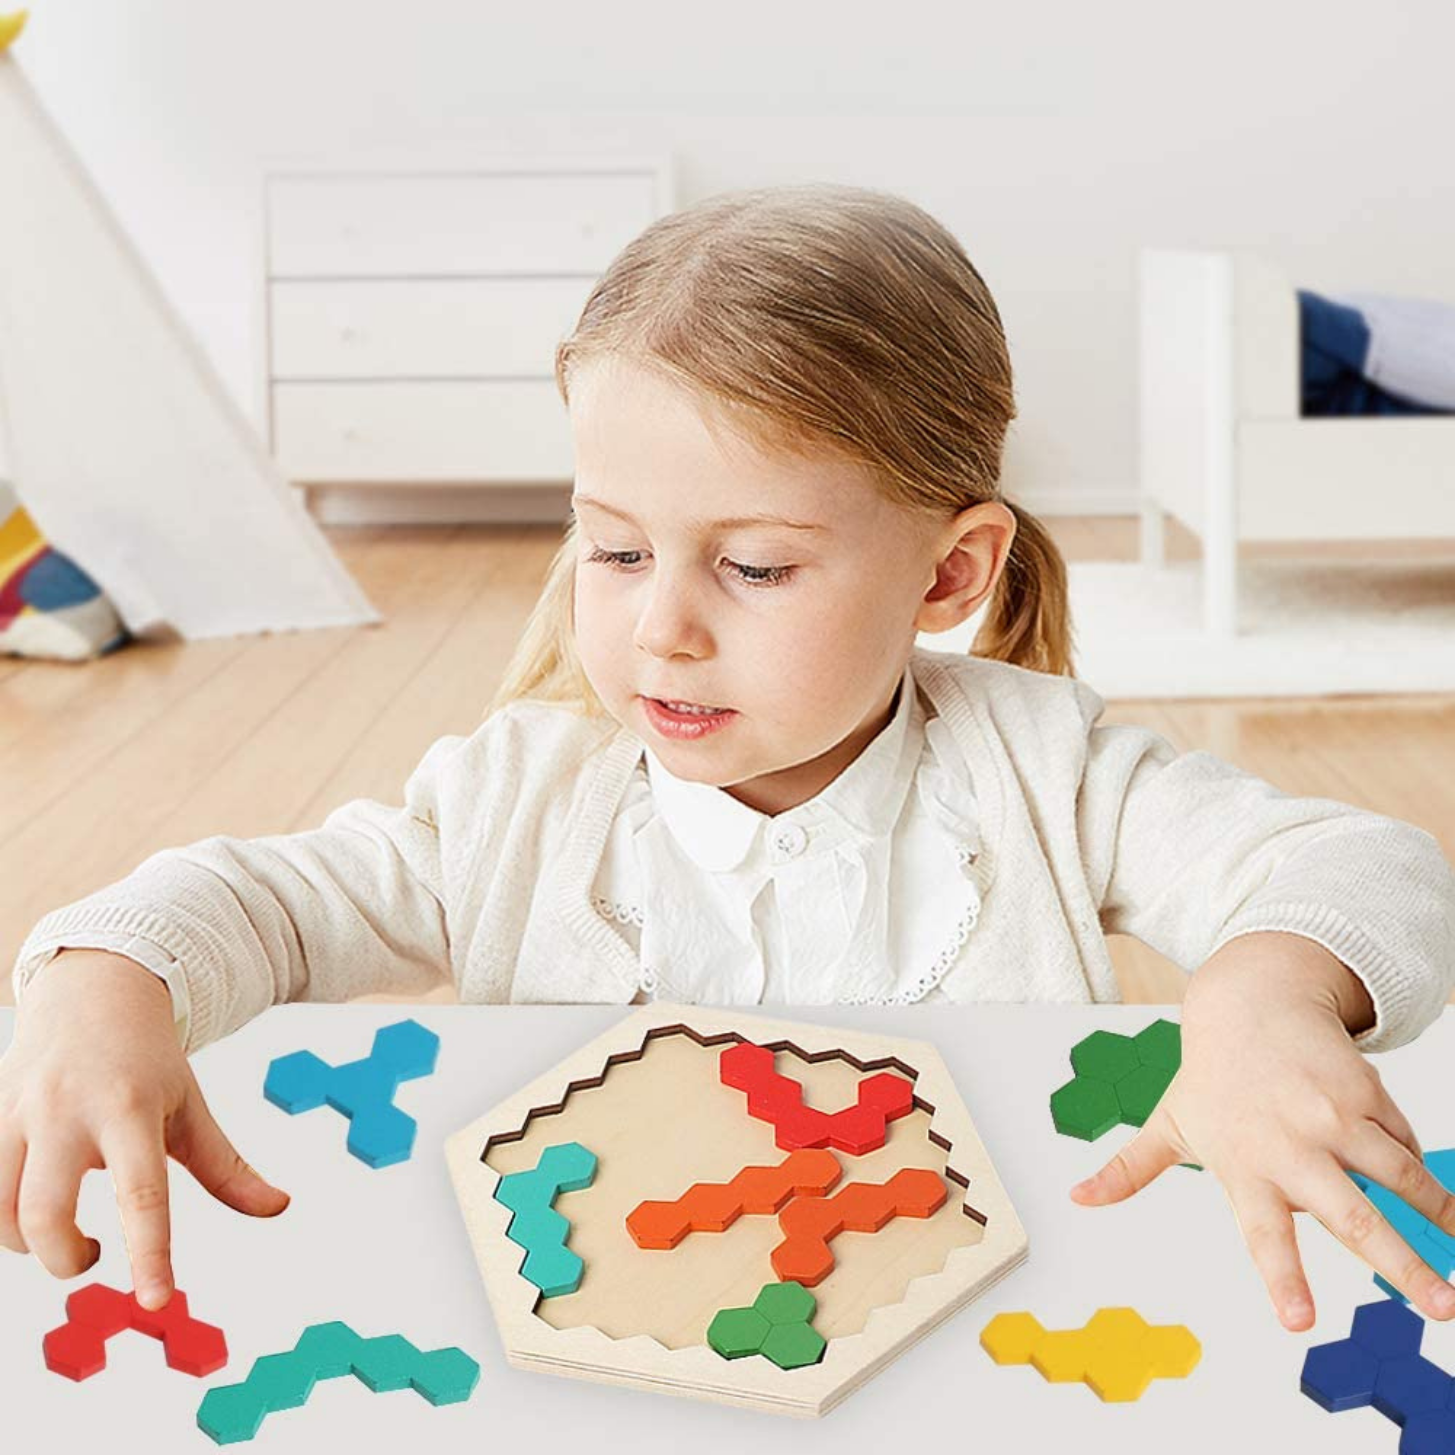 Sensorii's games- Girl playing with Sensorii's hexagon puzzle 